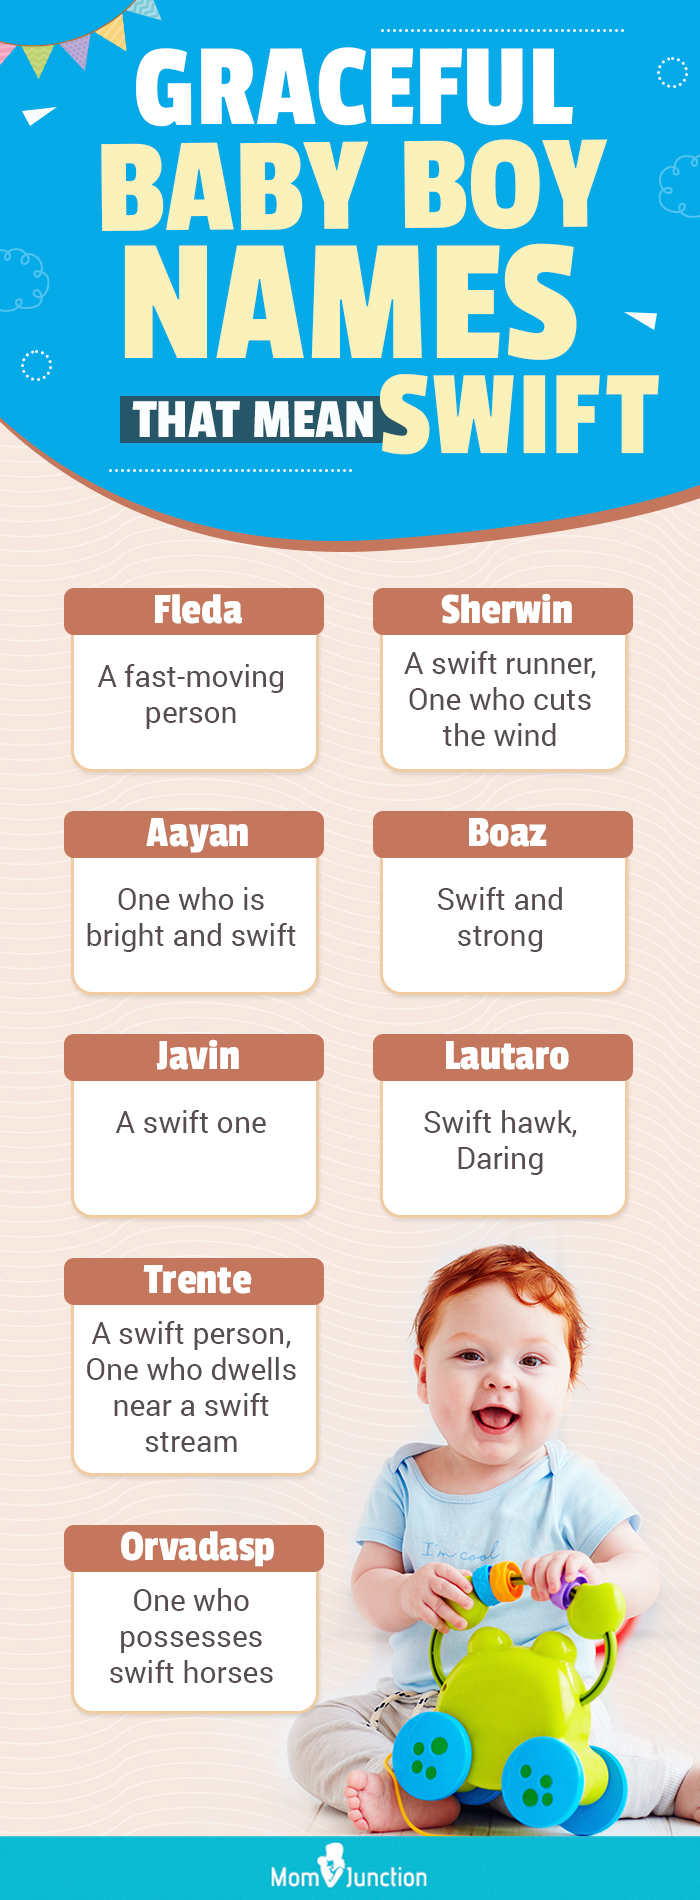 Graceful Baby Boy Names That Mean Swift (infographic)